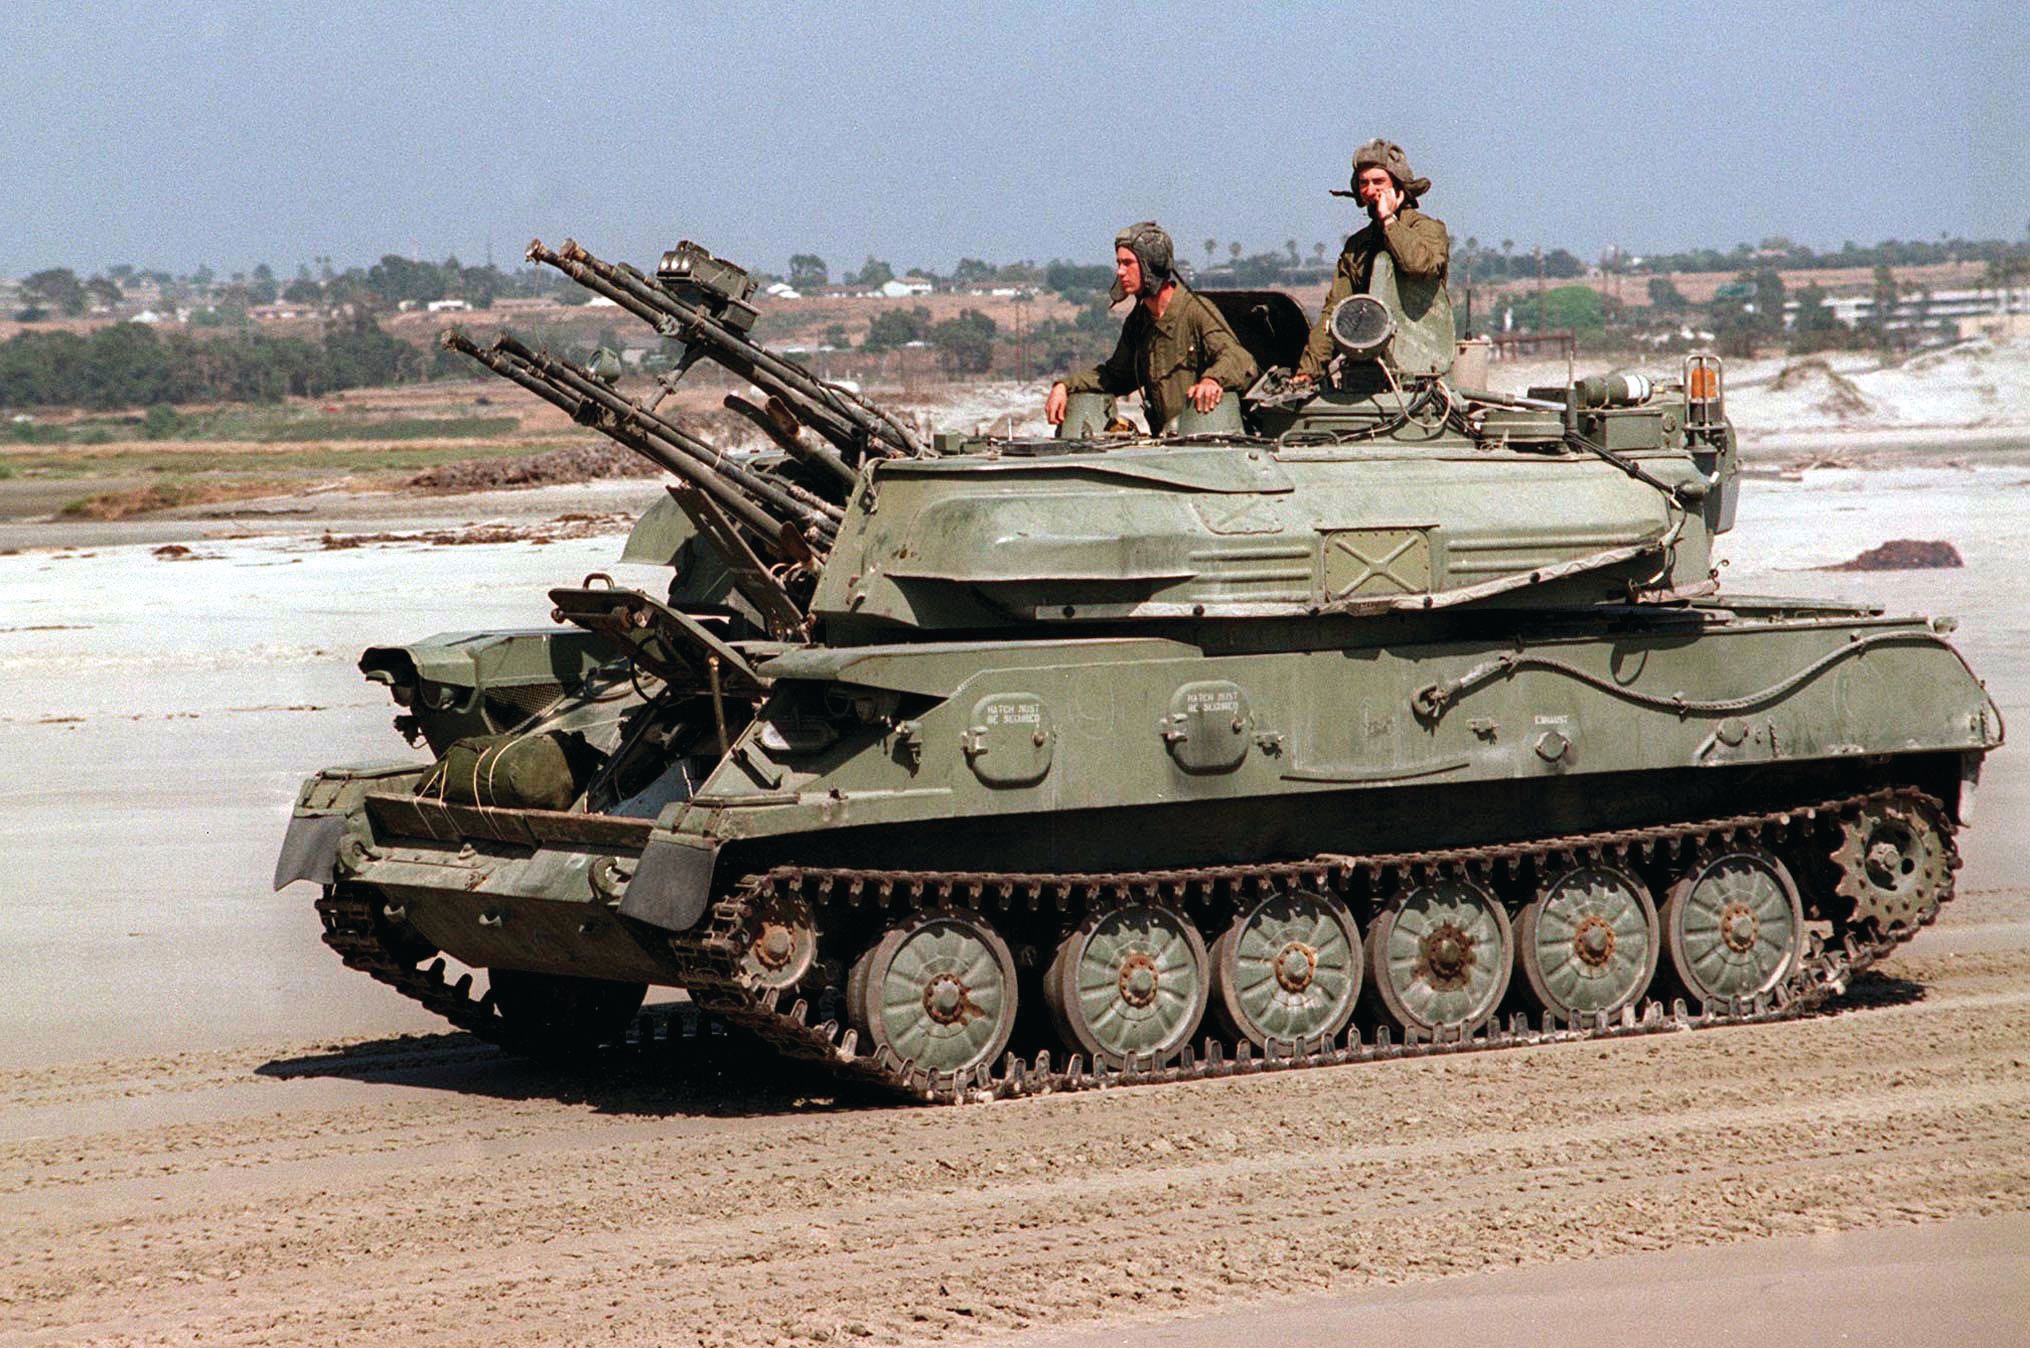 U.S. Marines operate a former Soviet bloc ZSU-23-4 during a training exercise in the 1990s. In recent years Russian contractors have upgraded the vehicle's weapons and radar for international clients.